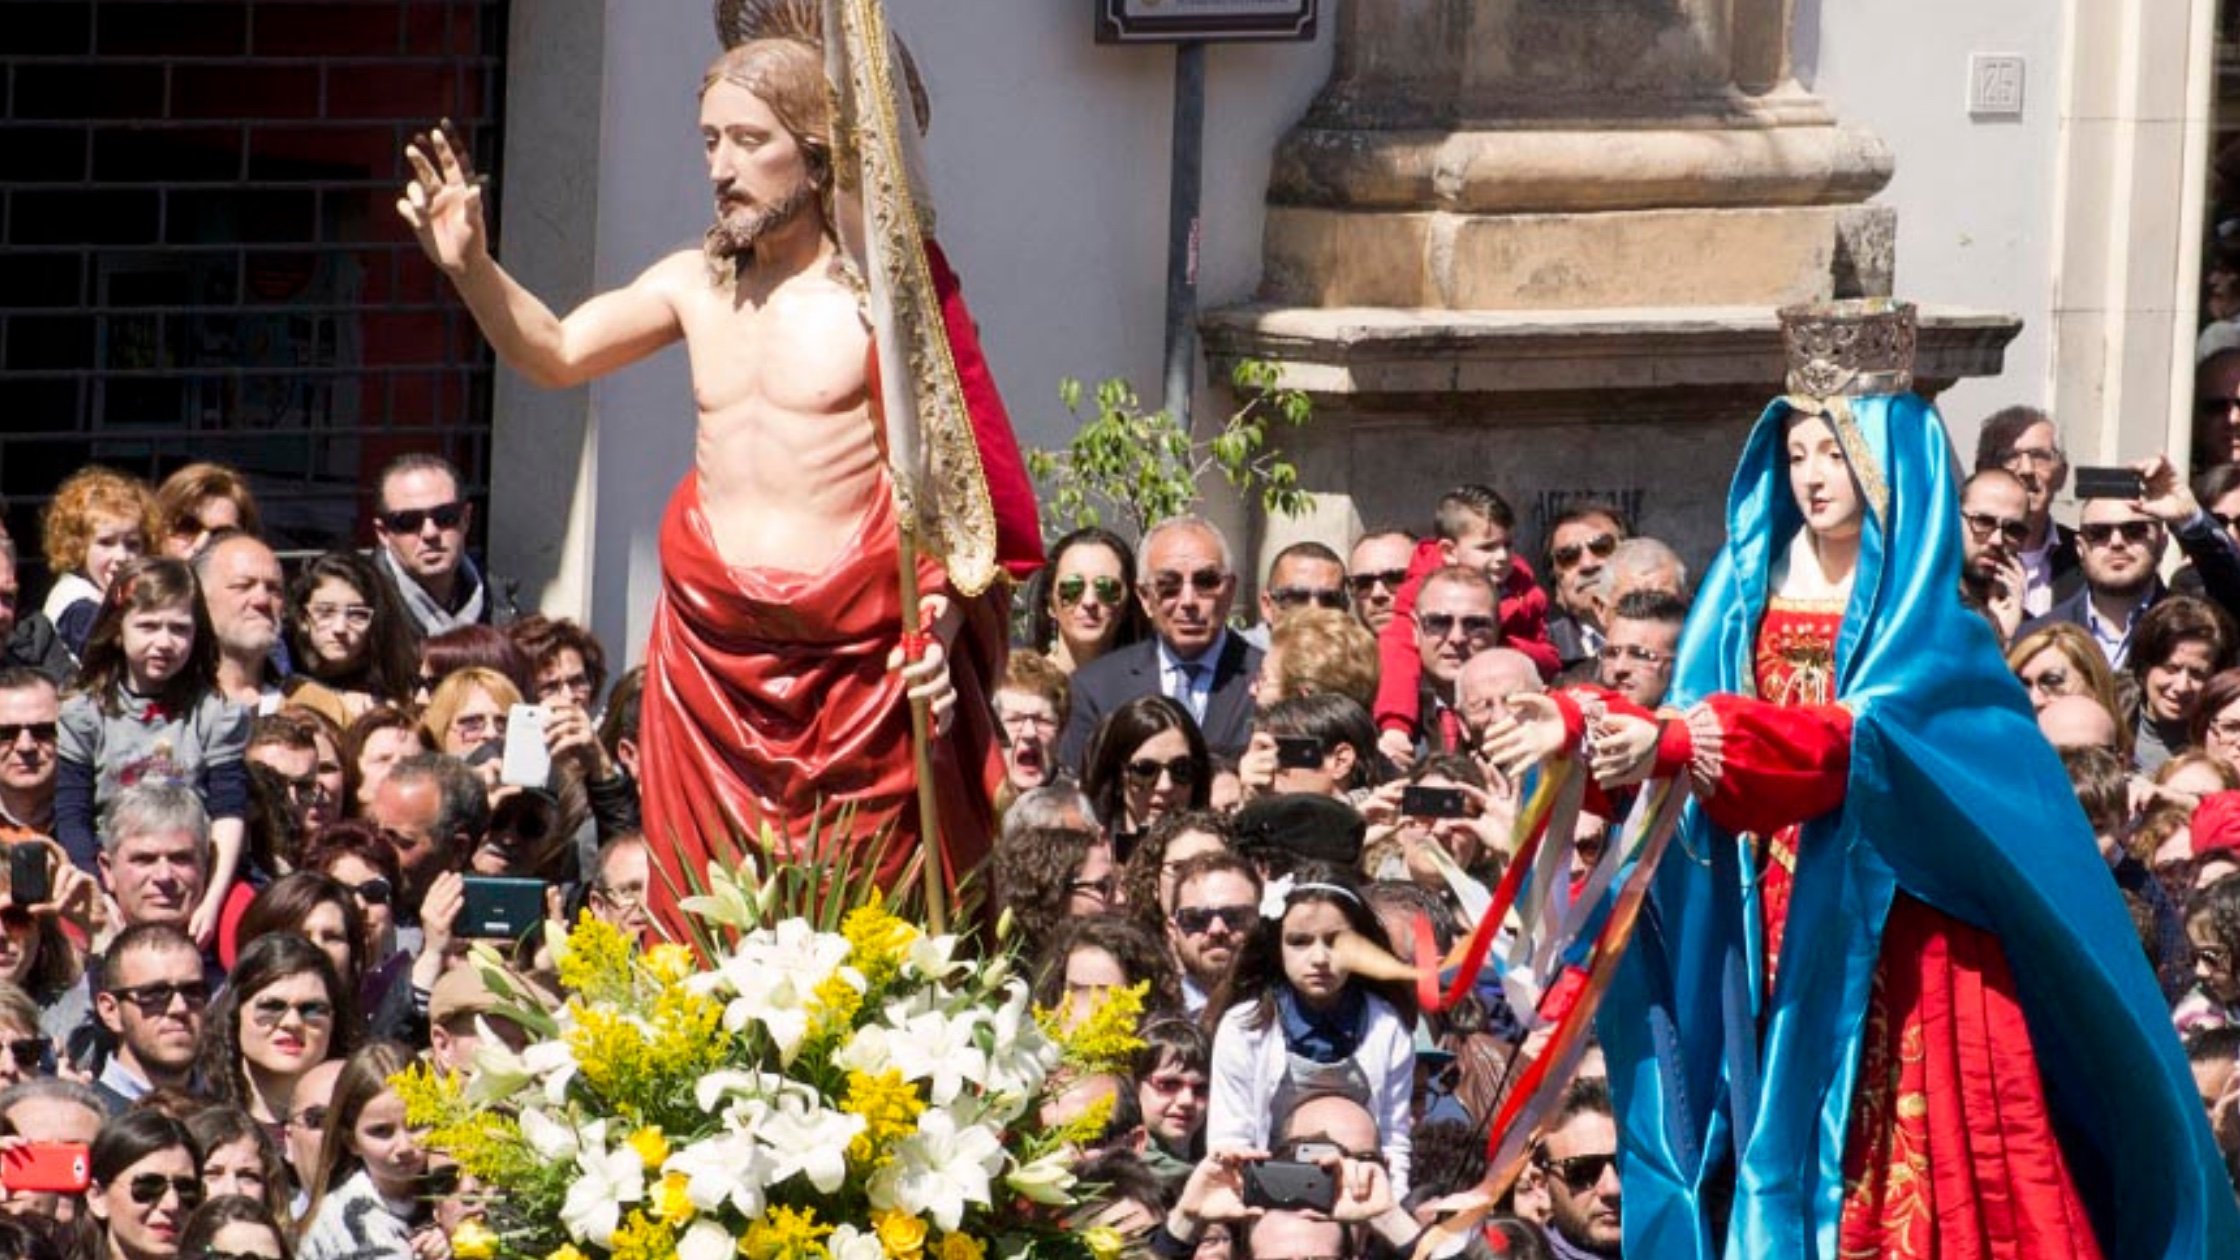 Easter in Italy, Modica